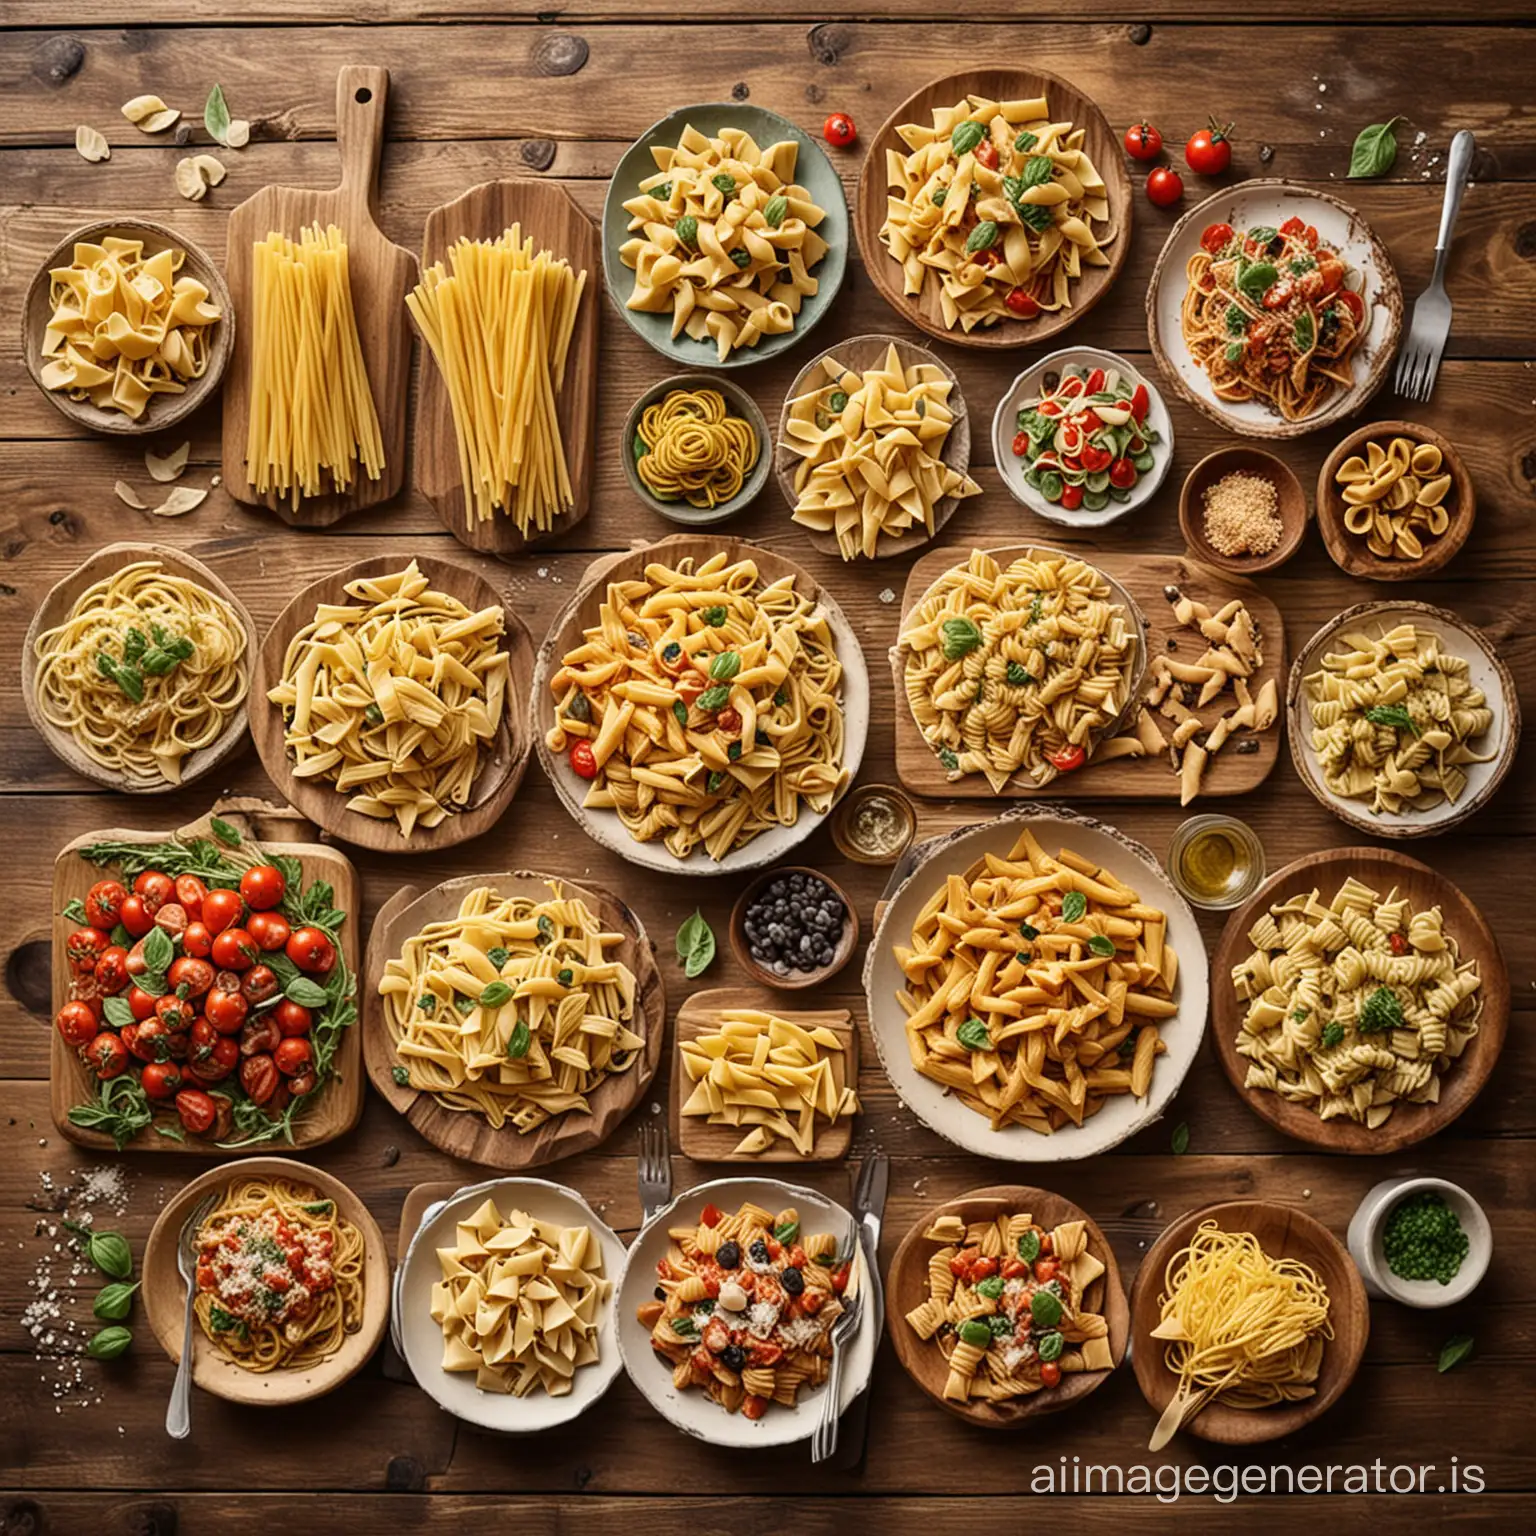 Varieties-of-Pasta-Displayed-on-Rustic-Wooden-Table-in-a-Warm-and-Inviting-Setting